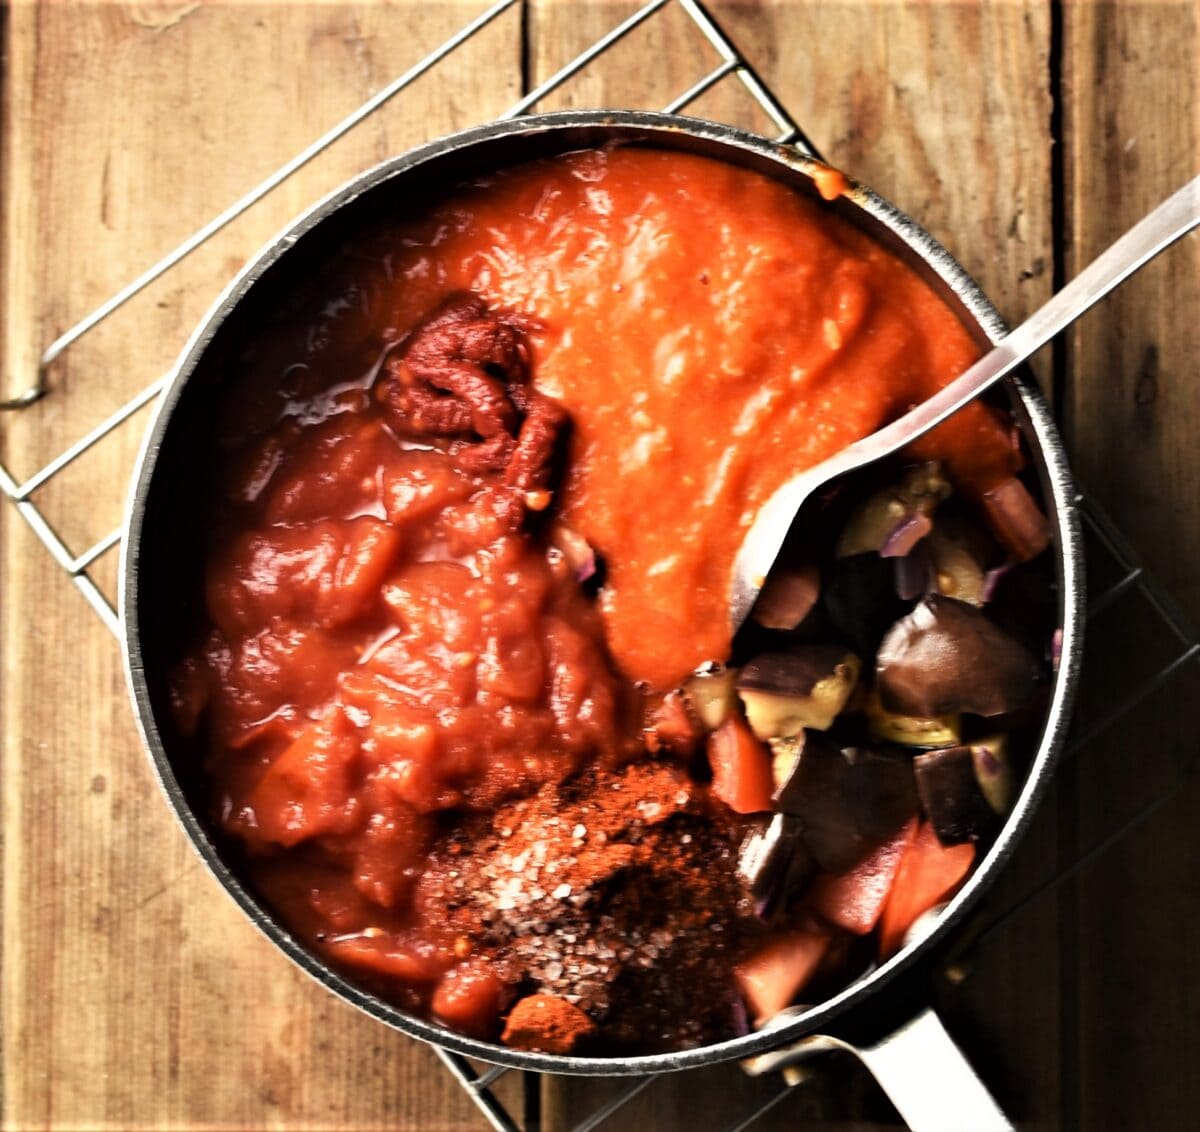 Chopped eggplant, tomatoes and pepper puree in pot with spoon.